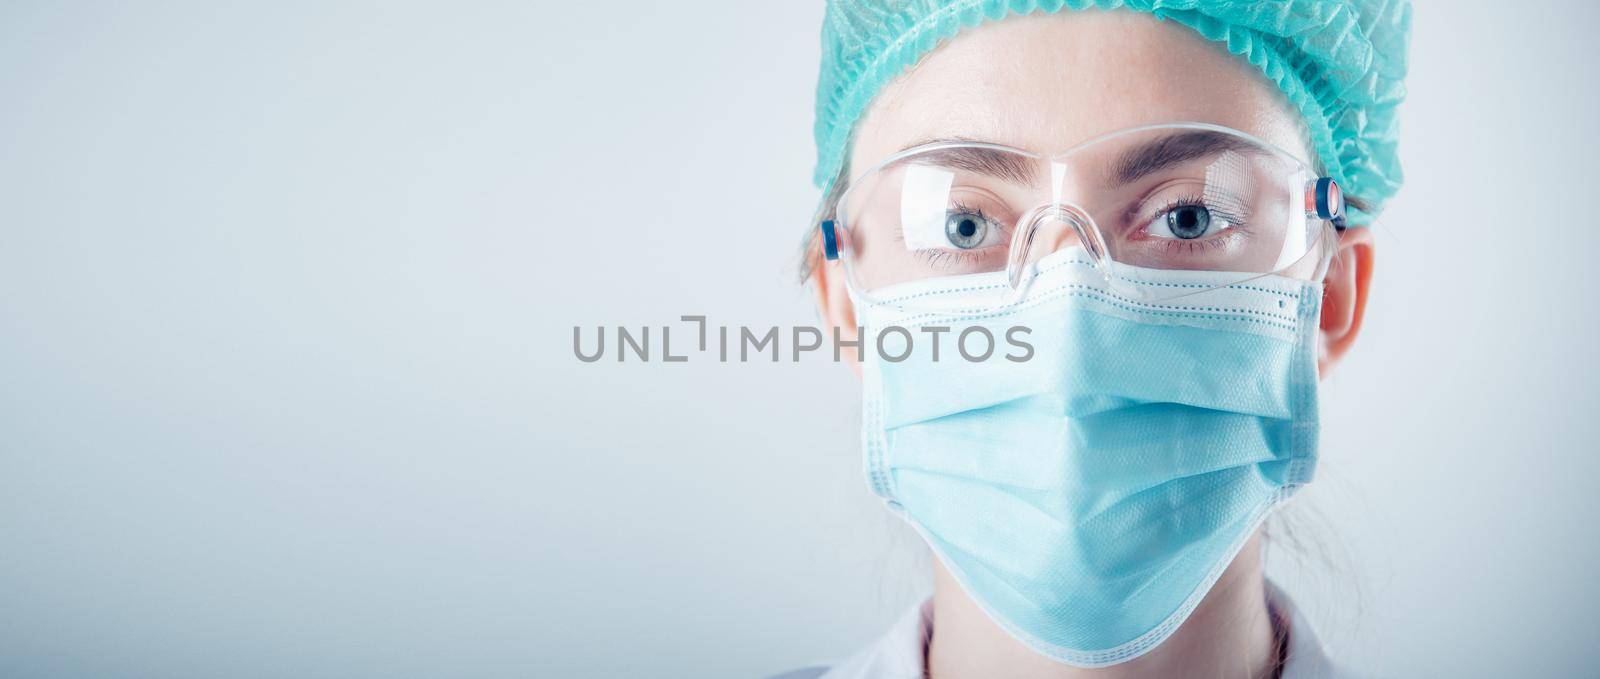 Medical Surgical Doctor and Health Care, Portrait of Surgeon Doctor in PPE Equipment on Isolated Background. Medicine Female Doctors Wearing Face Mask and Cap for Patients Surgery Work. Medic Hospital by MahaHeang245789